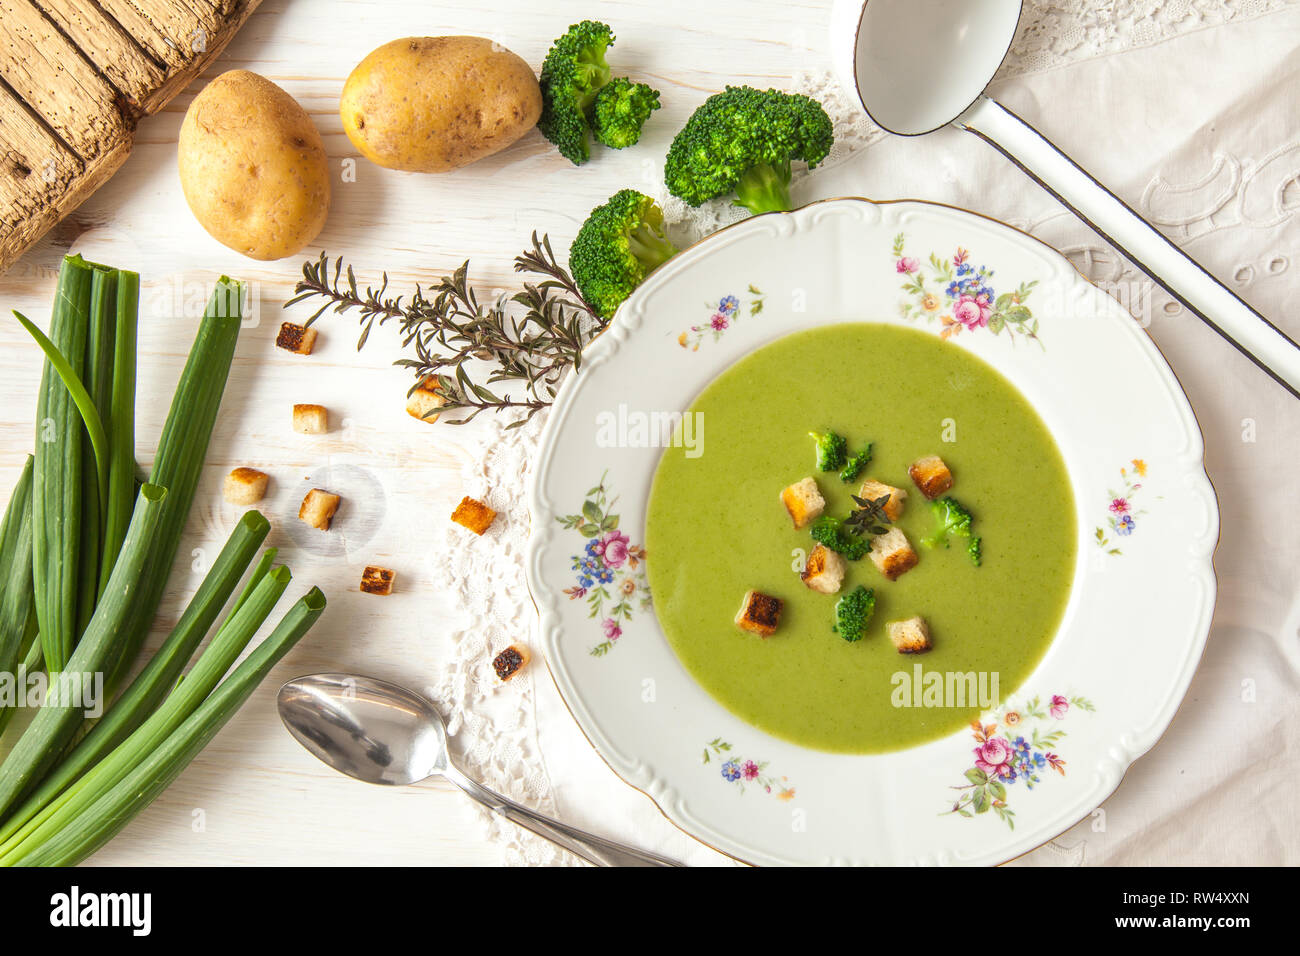 Spring detox broccoli green cream soup with potatoes and vegan cream in bowl on bright wooden board over white background, top view. Clean eating Stock Photo